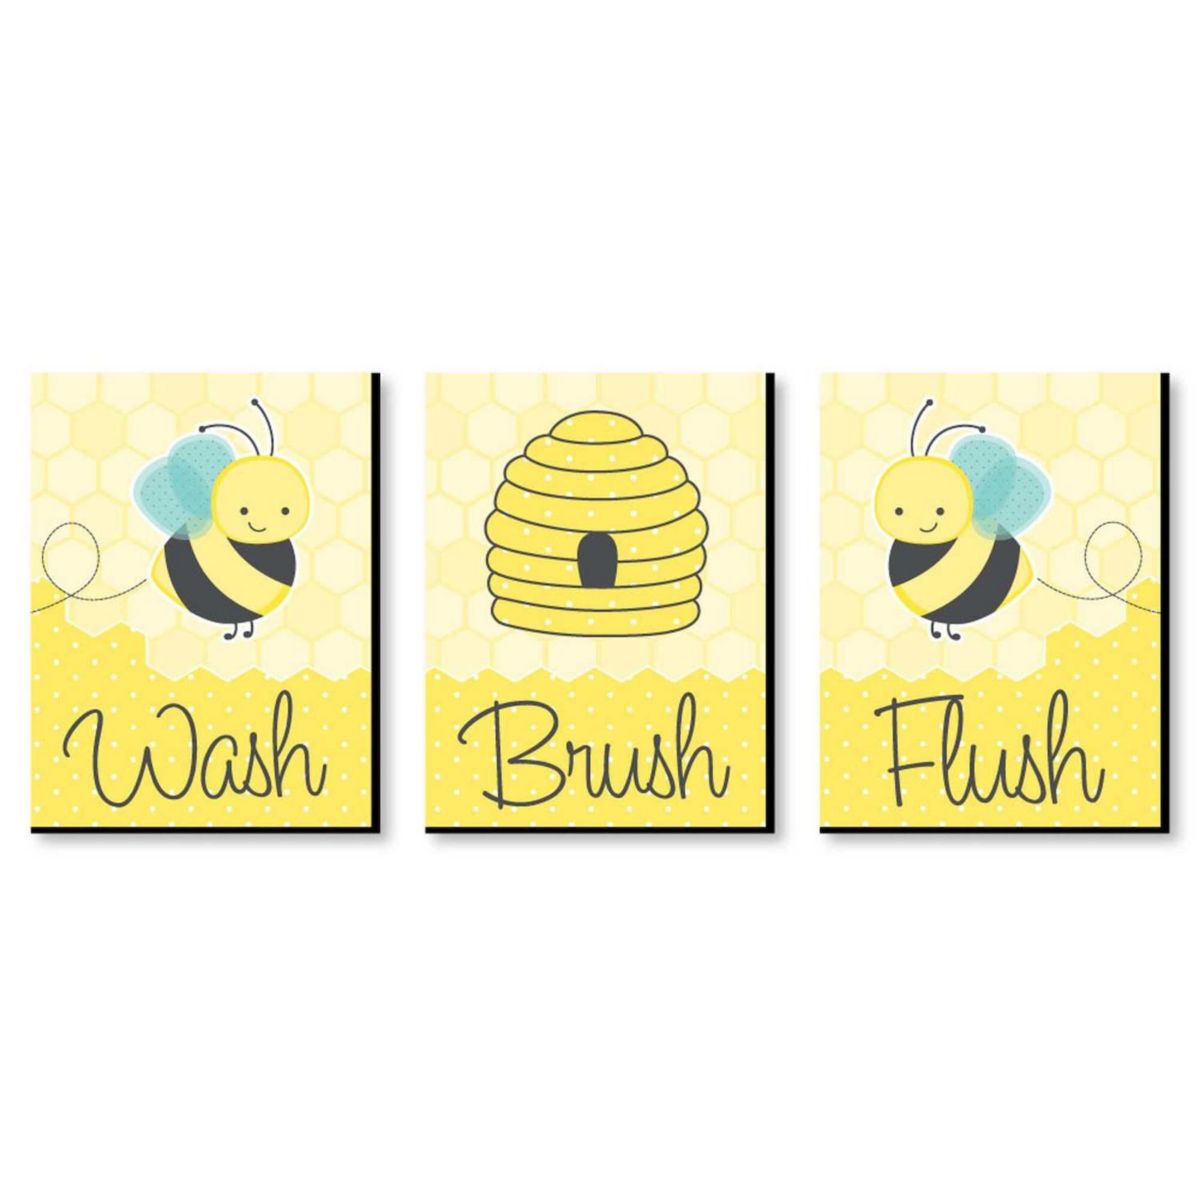 Big Dot of Happiness Honey Bee - Kids Bathroom Rules Wall Art - 7.5 x 10 inches - Set of 3 Signs - Wash, Brush, Flush Big Dot of Happiness